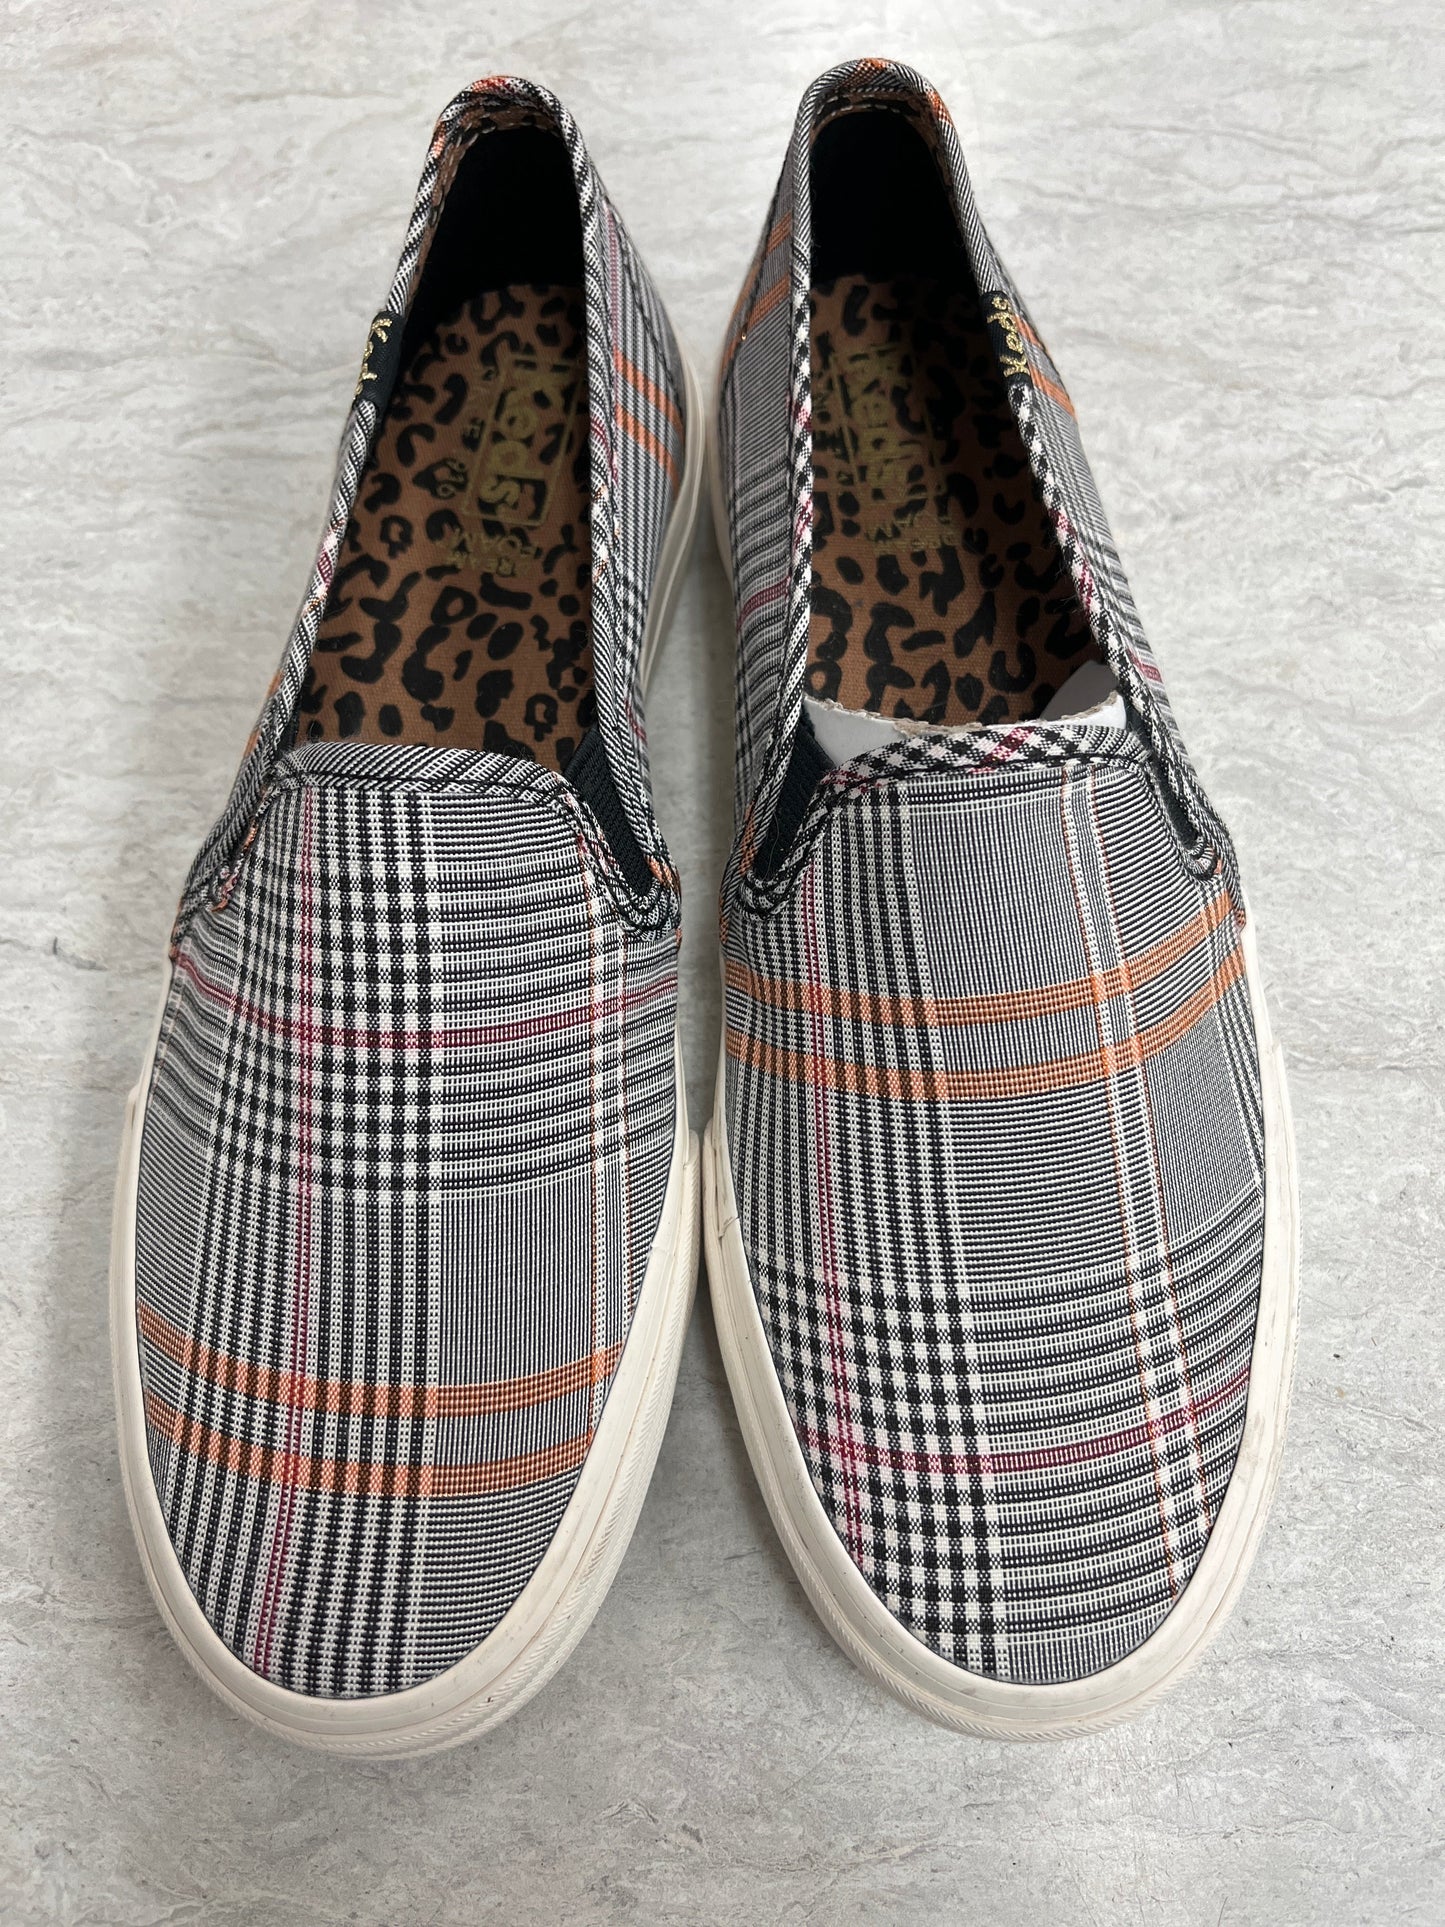 Plaid Pattern Shoes Sneakers Keds, Size 7